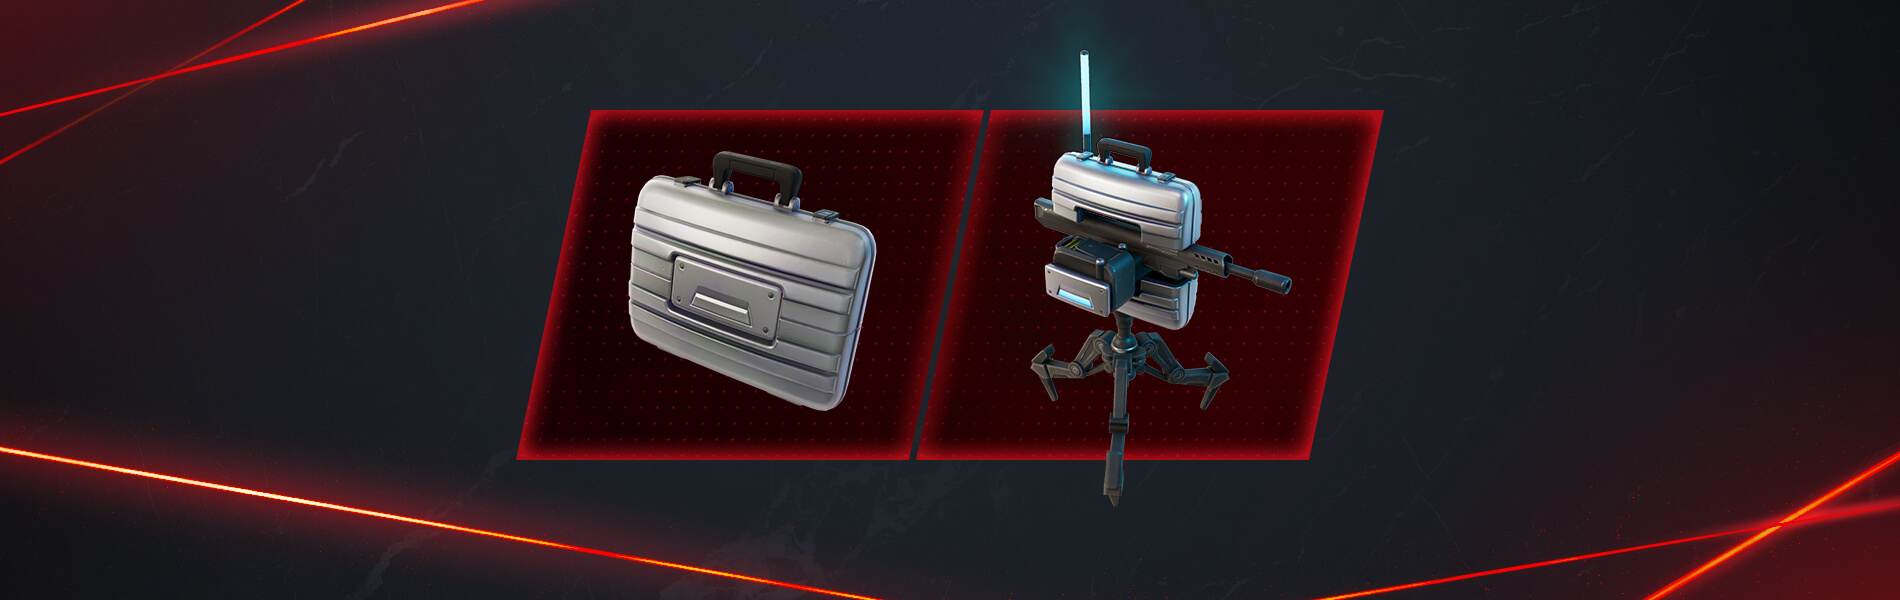 fortnite-business-turret-briefcase-form-and-deployed-form-1900x600-3f69d06e7122